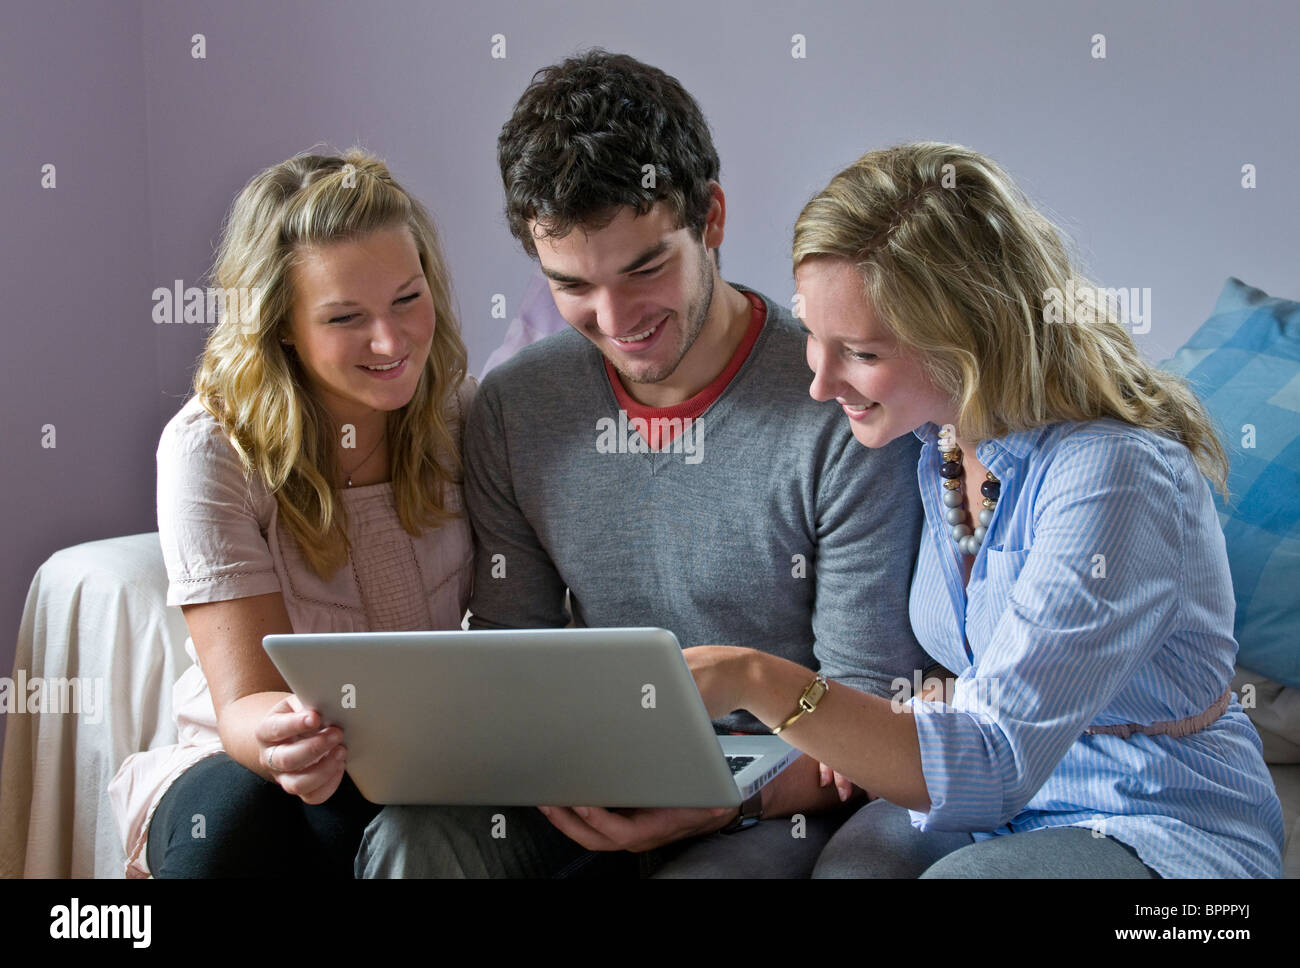 18-22 years flat mates Teenage boy and two girls relaxing indoors enjoy using their wireless home laptop computer Stock Photo